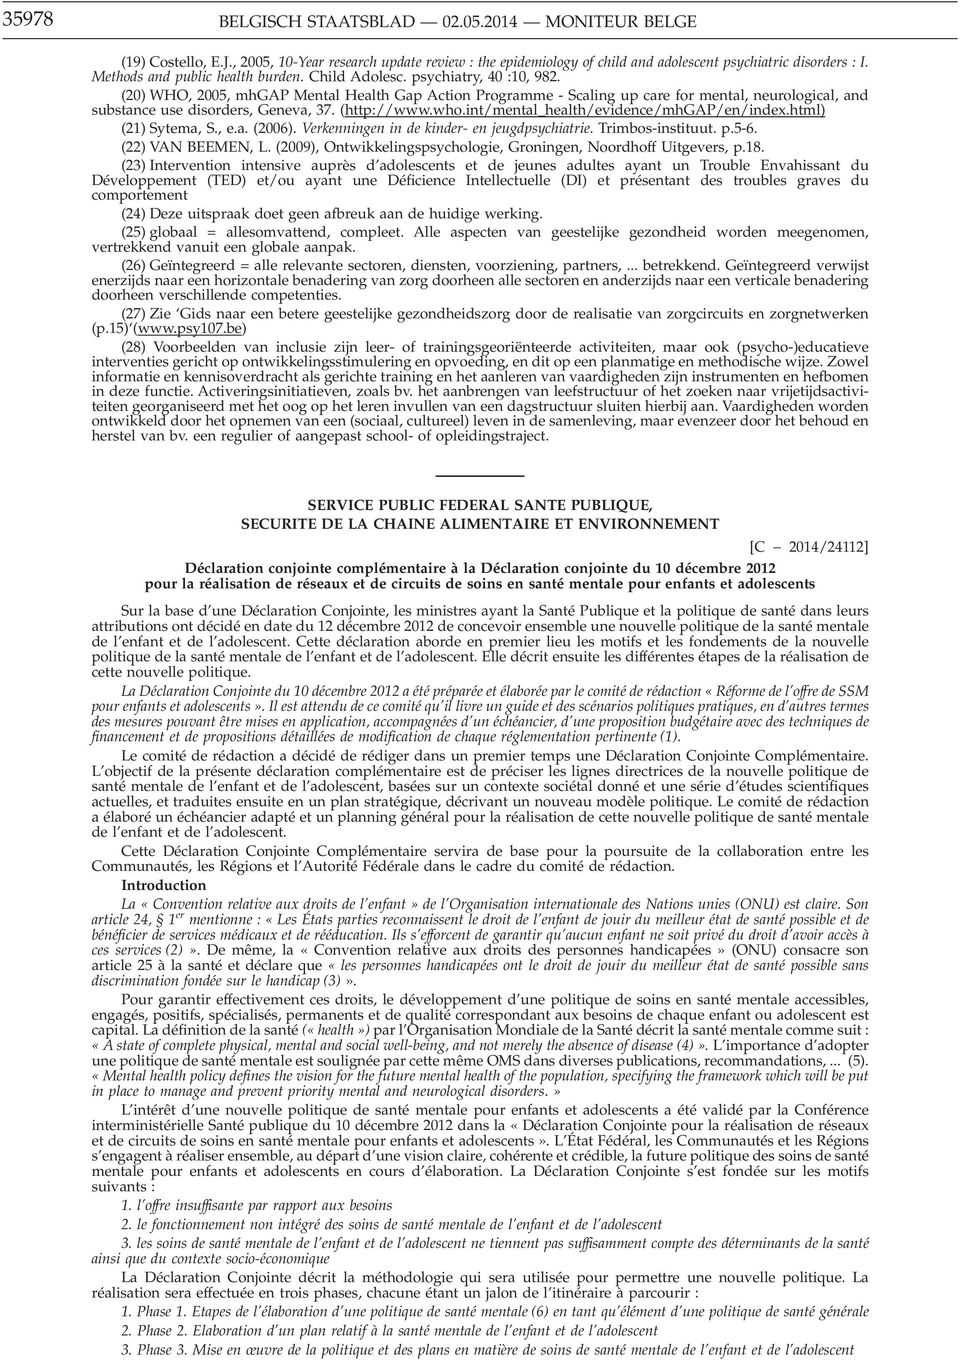 (20) WHO, 2005, mhgap Mental Health Gap Action Programme - Scaling up care for mental, neurological, and substance use disorders, Geneva, 37. (http://www.who.int/mental_health/evidence/mhgap/en/index.